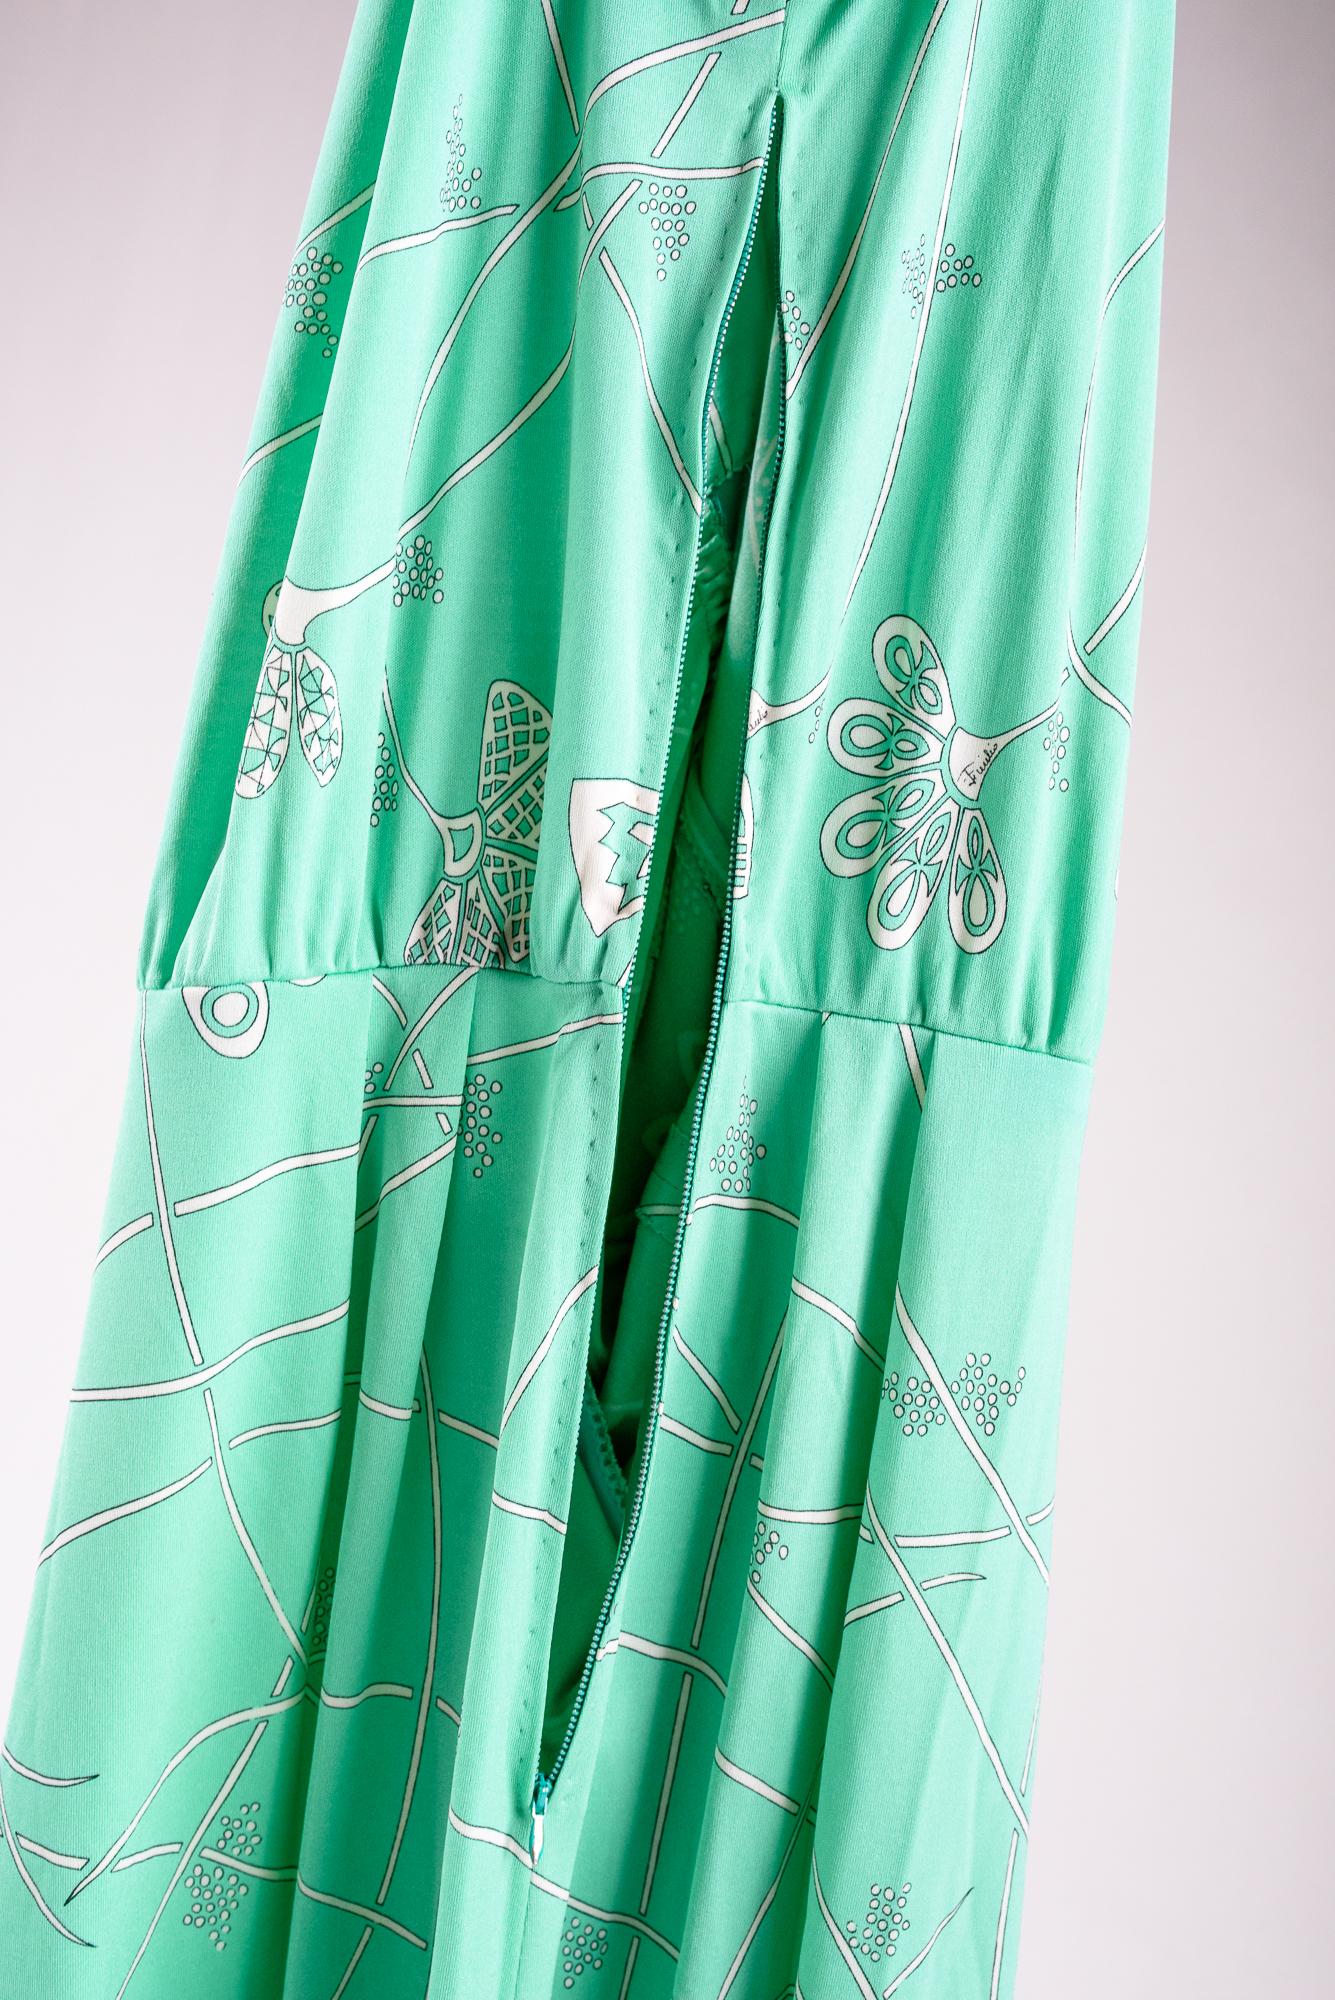 Women's A light green printed silk jersey dress by Emilio Pucci - Italy Circa 1980 For Sale